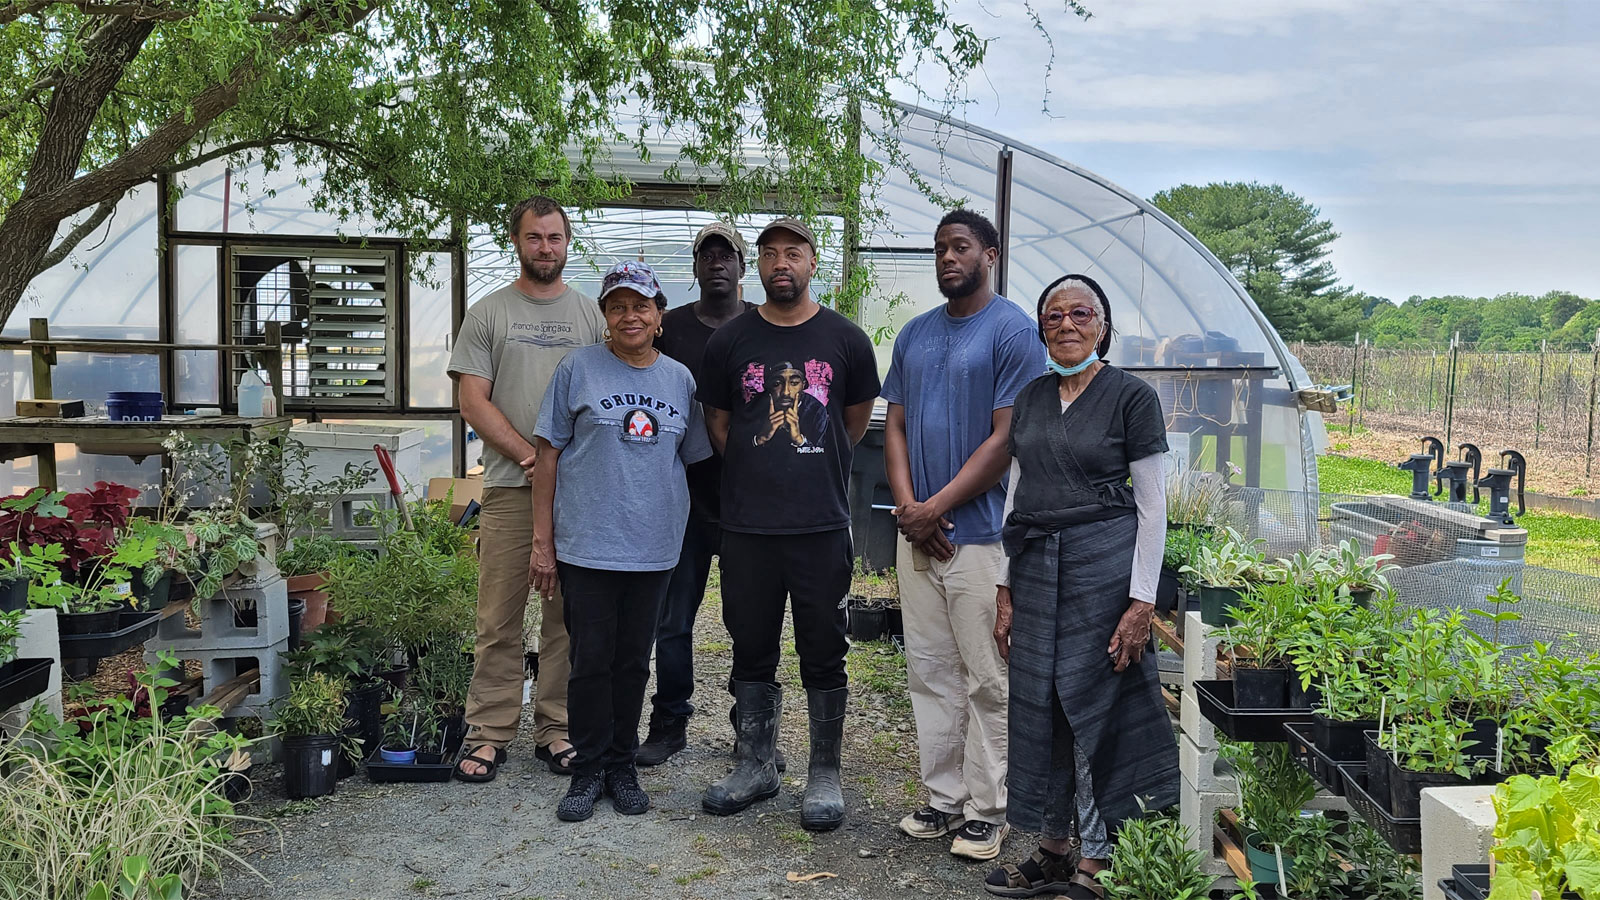 The founders of the Triad Farmers Network standing in front of a hoop house